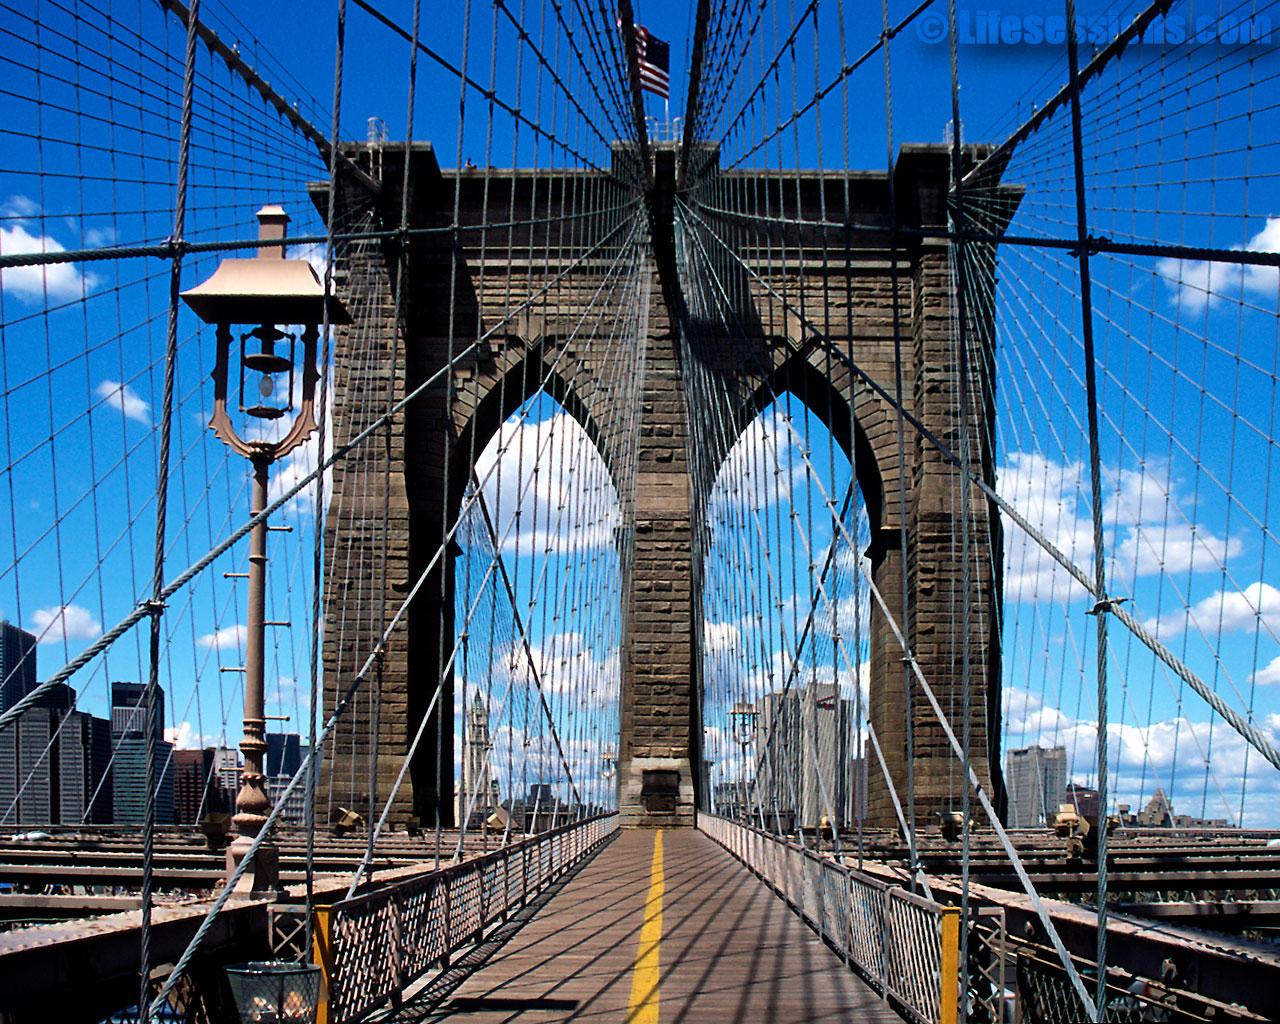 Hope you like this Brooklyn Bridge HD background as much as we do!